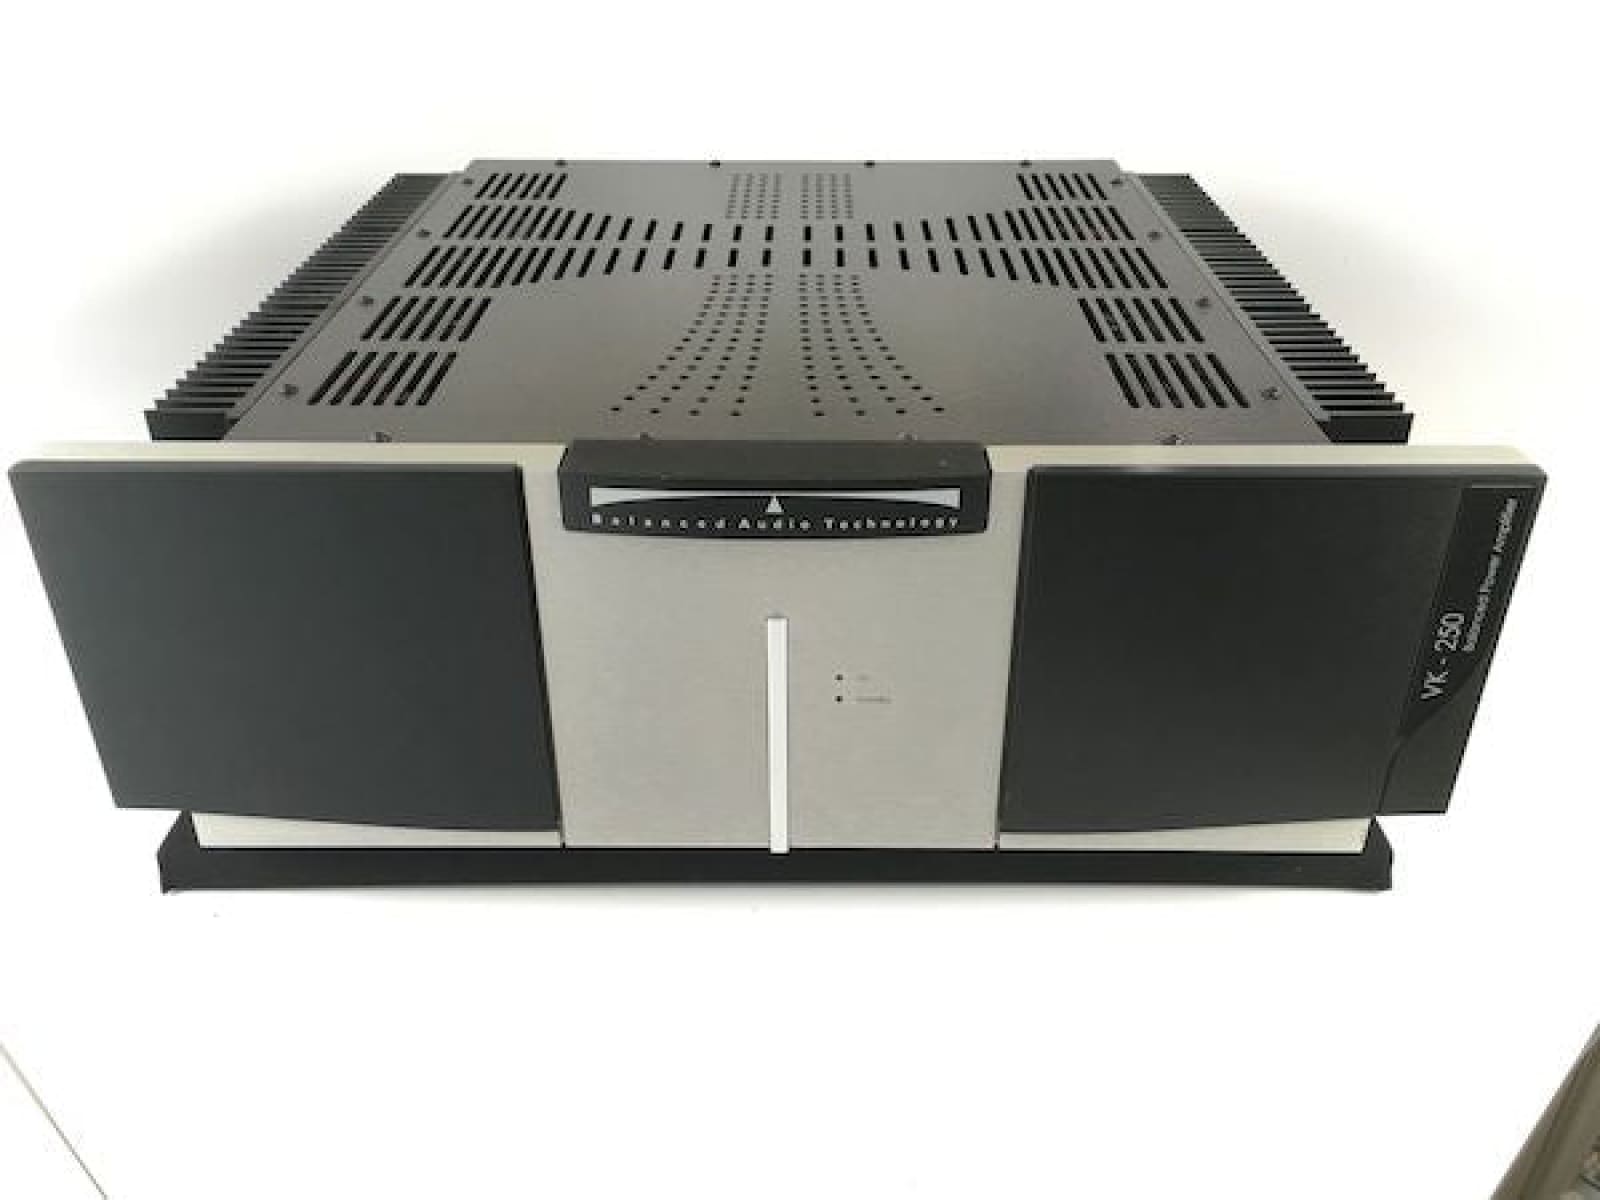 Balanced Audio Technology Vk-250 Solid State Amplifier 250W